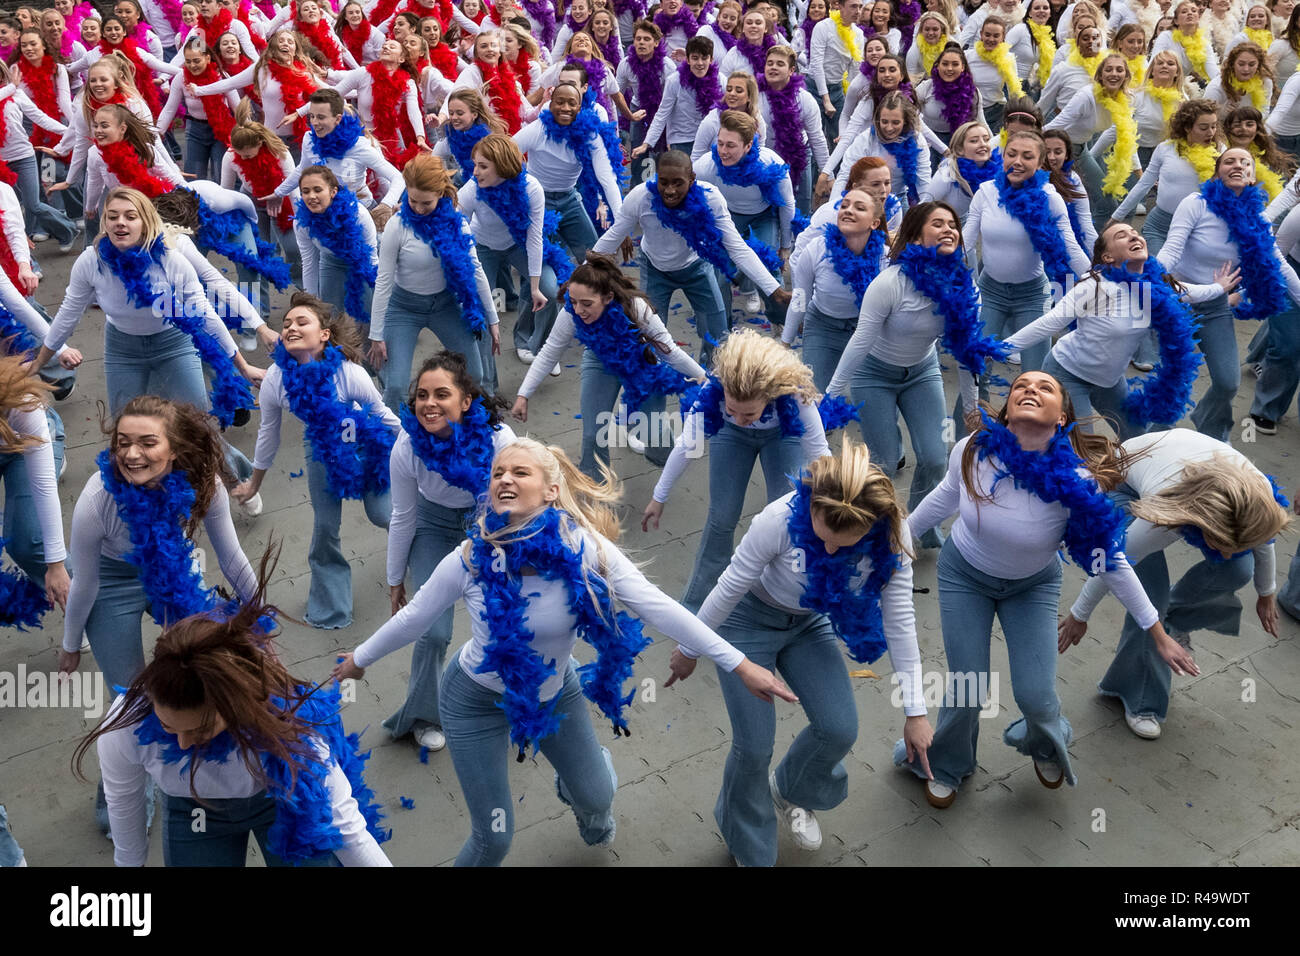 London, UK. 26th Nov 2018. 324 dancers in Mamma Mia! Here We Go Again inspired outfits break the world's largest disco dance record. Credit: Guy Corbishley/Alamy Live News Stock Photo